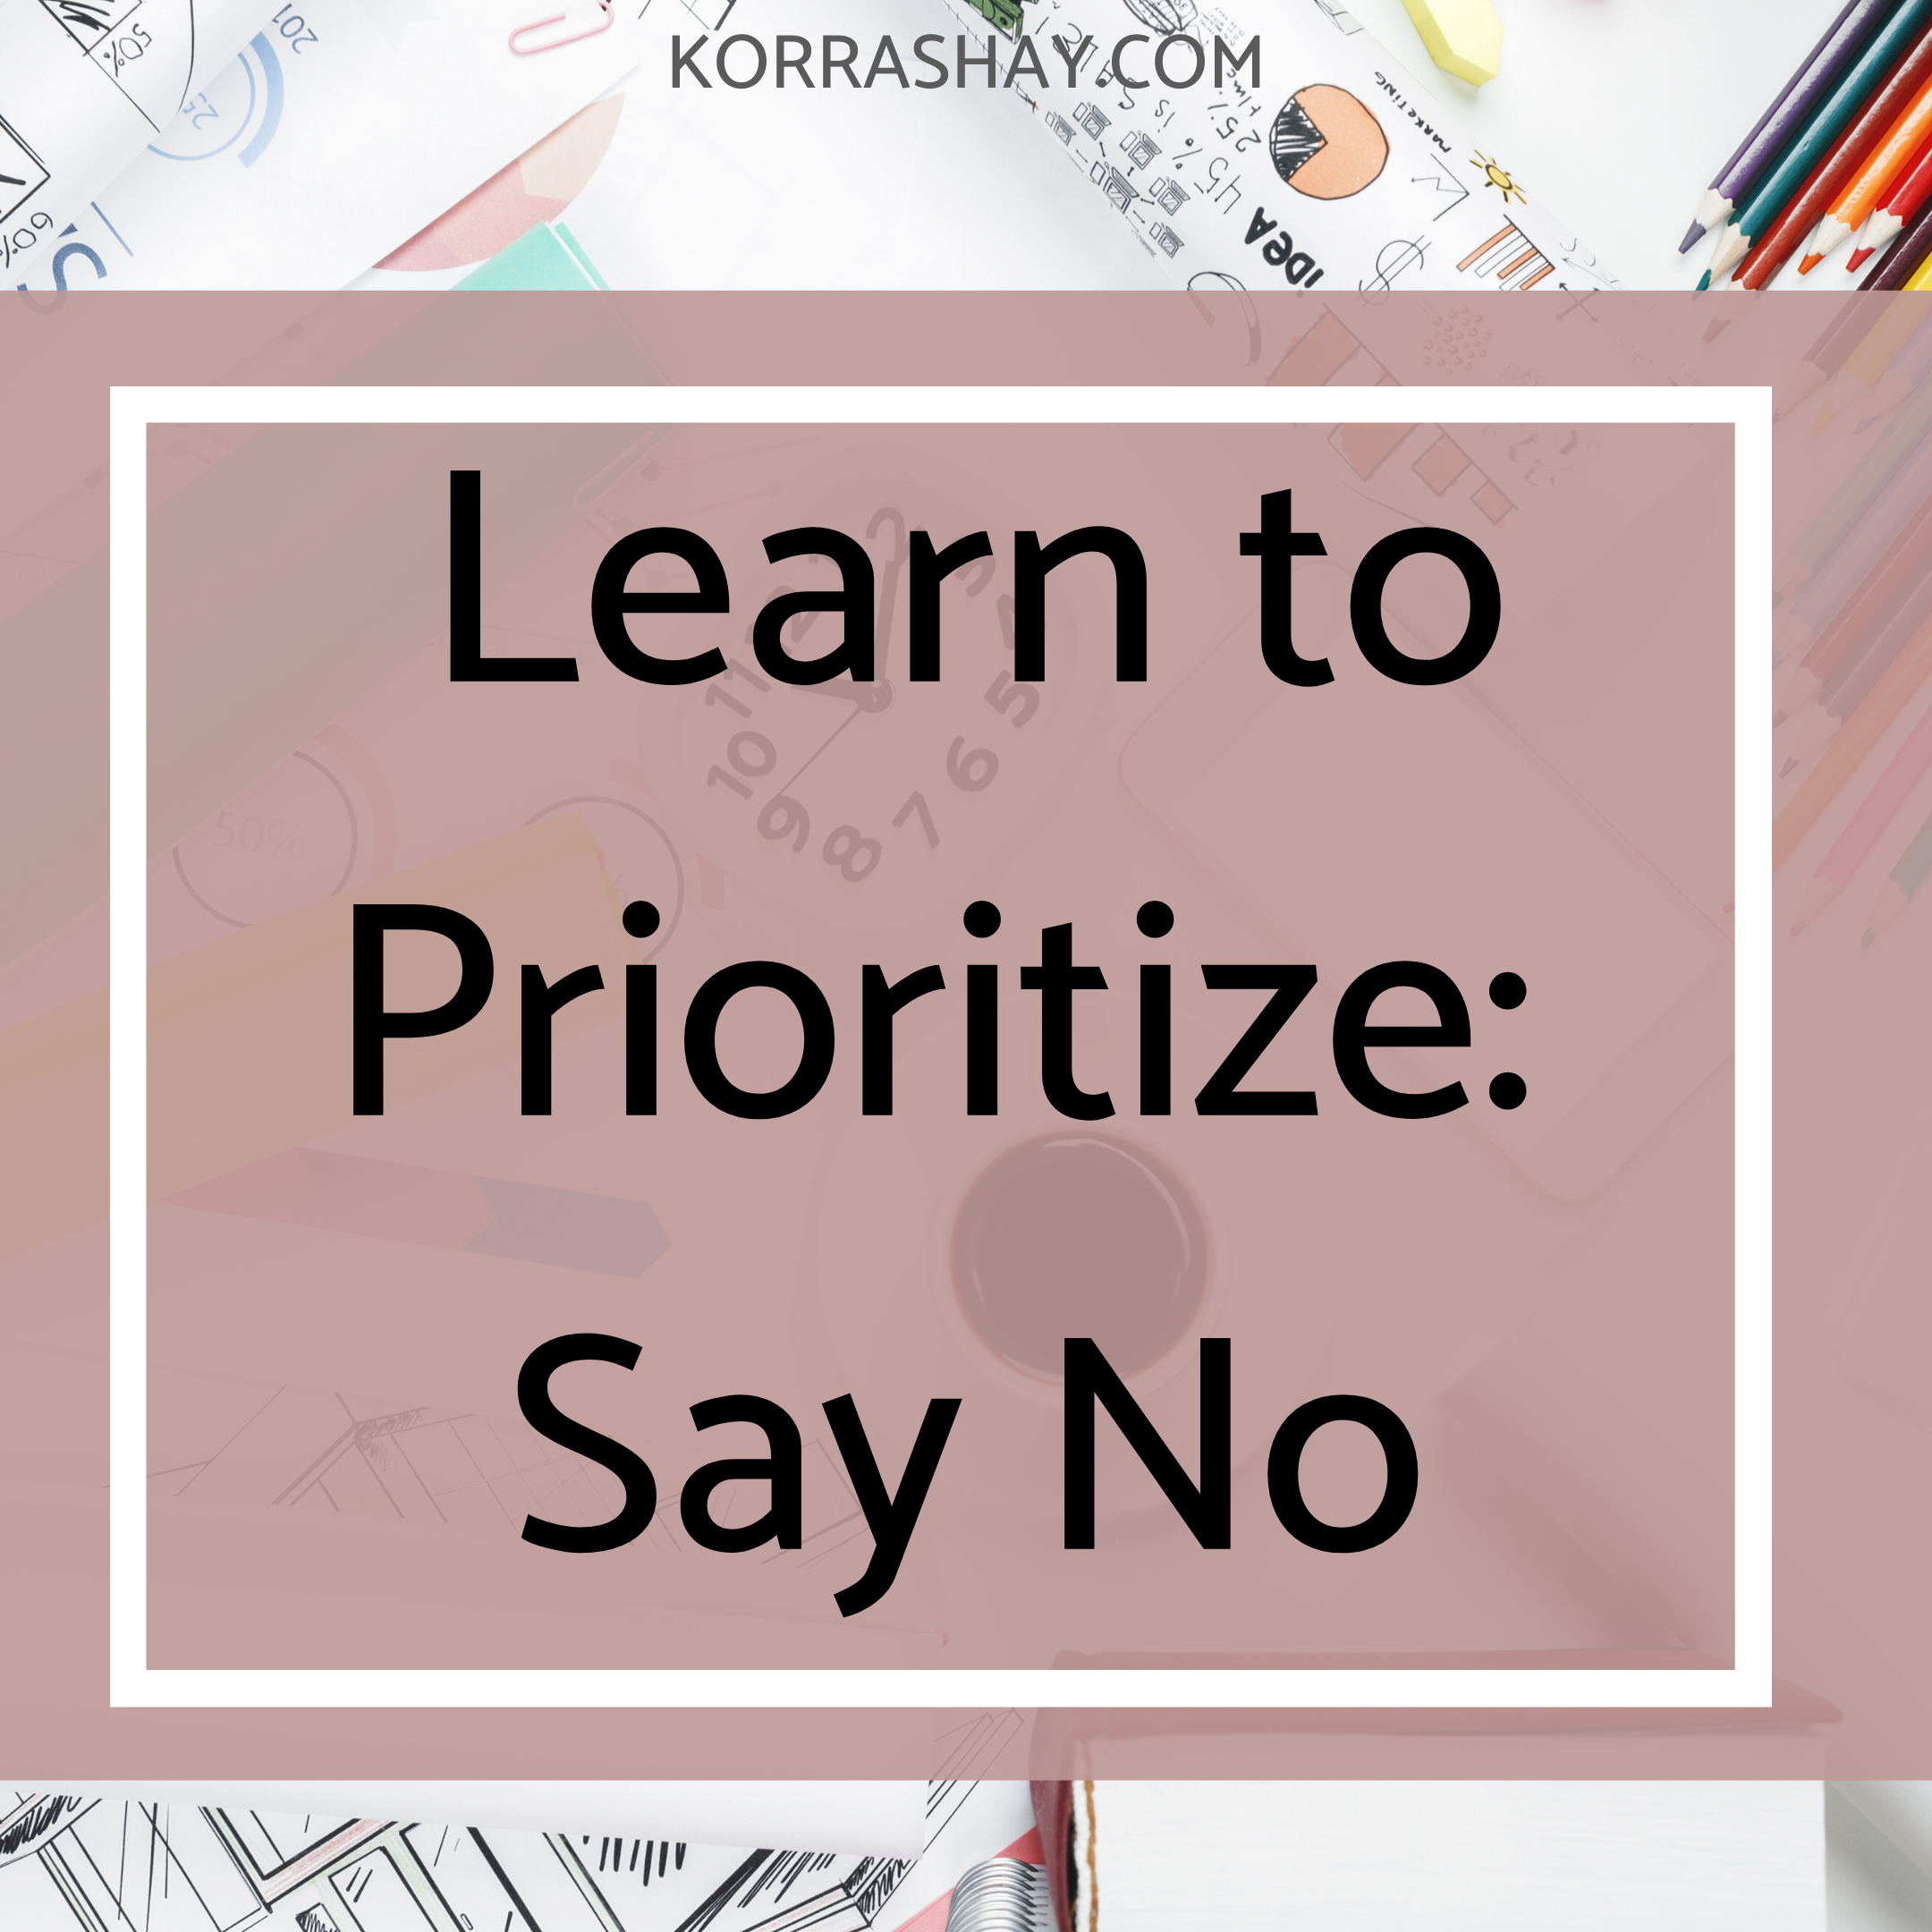 Learn to Prioritize: Say No